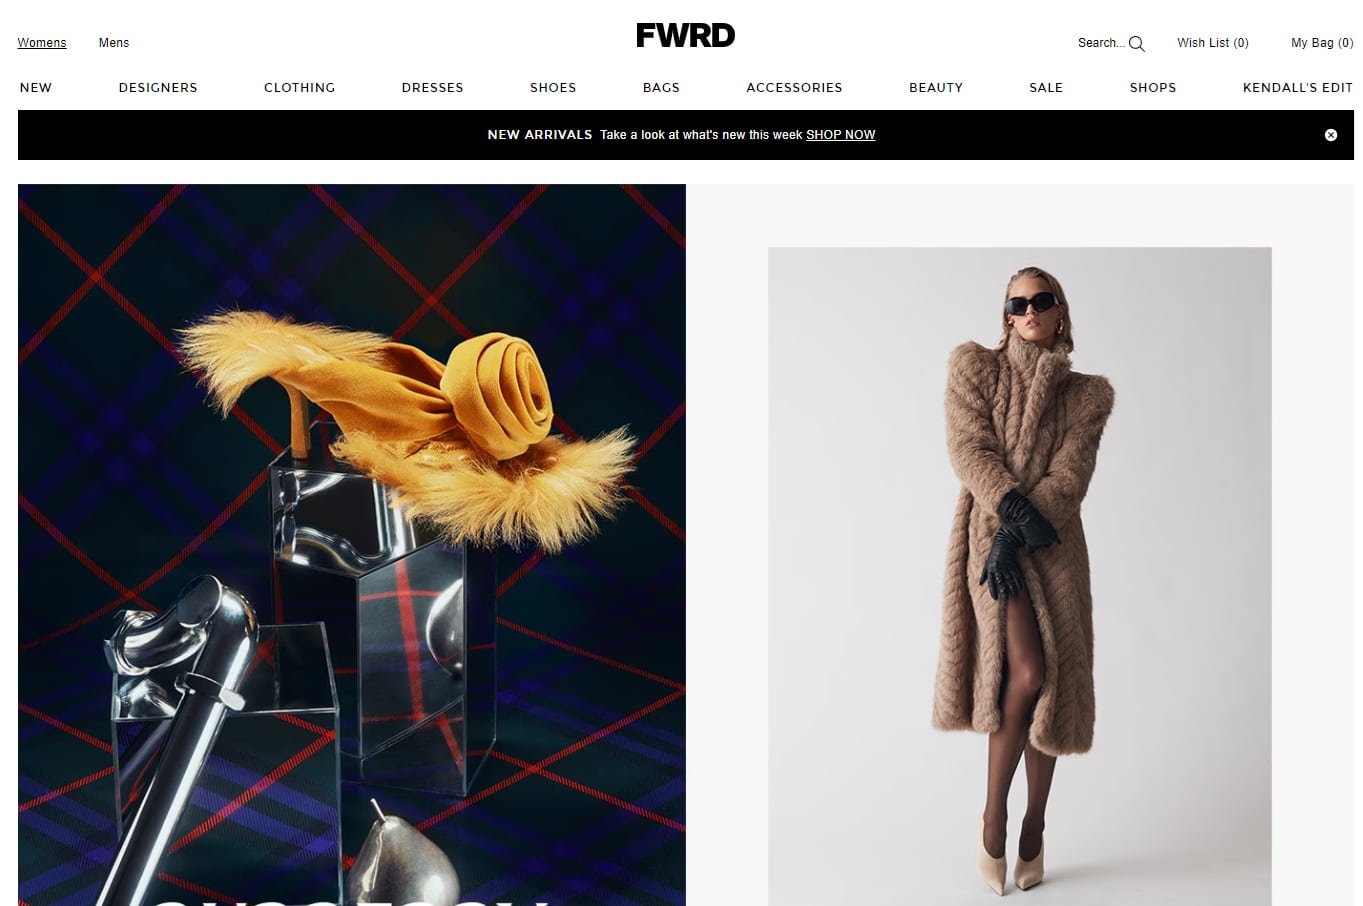 FWRD website homepage featuring Burberry perfume and a woman wearing a long fur coat in tan